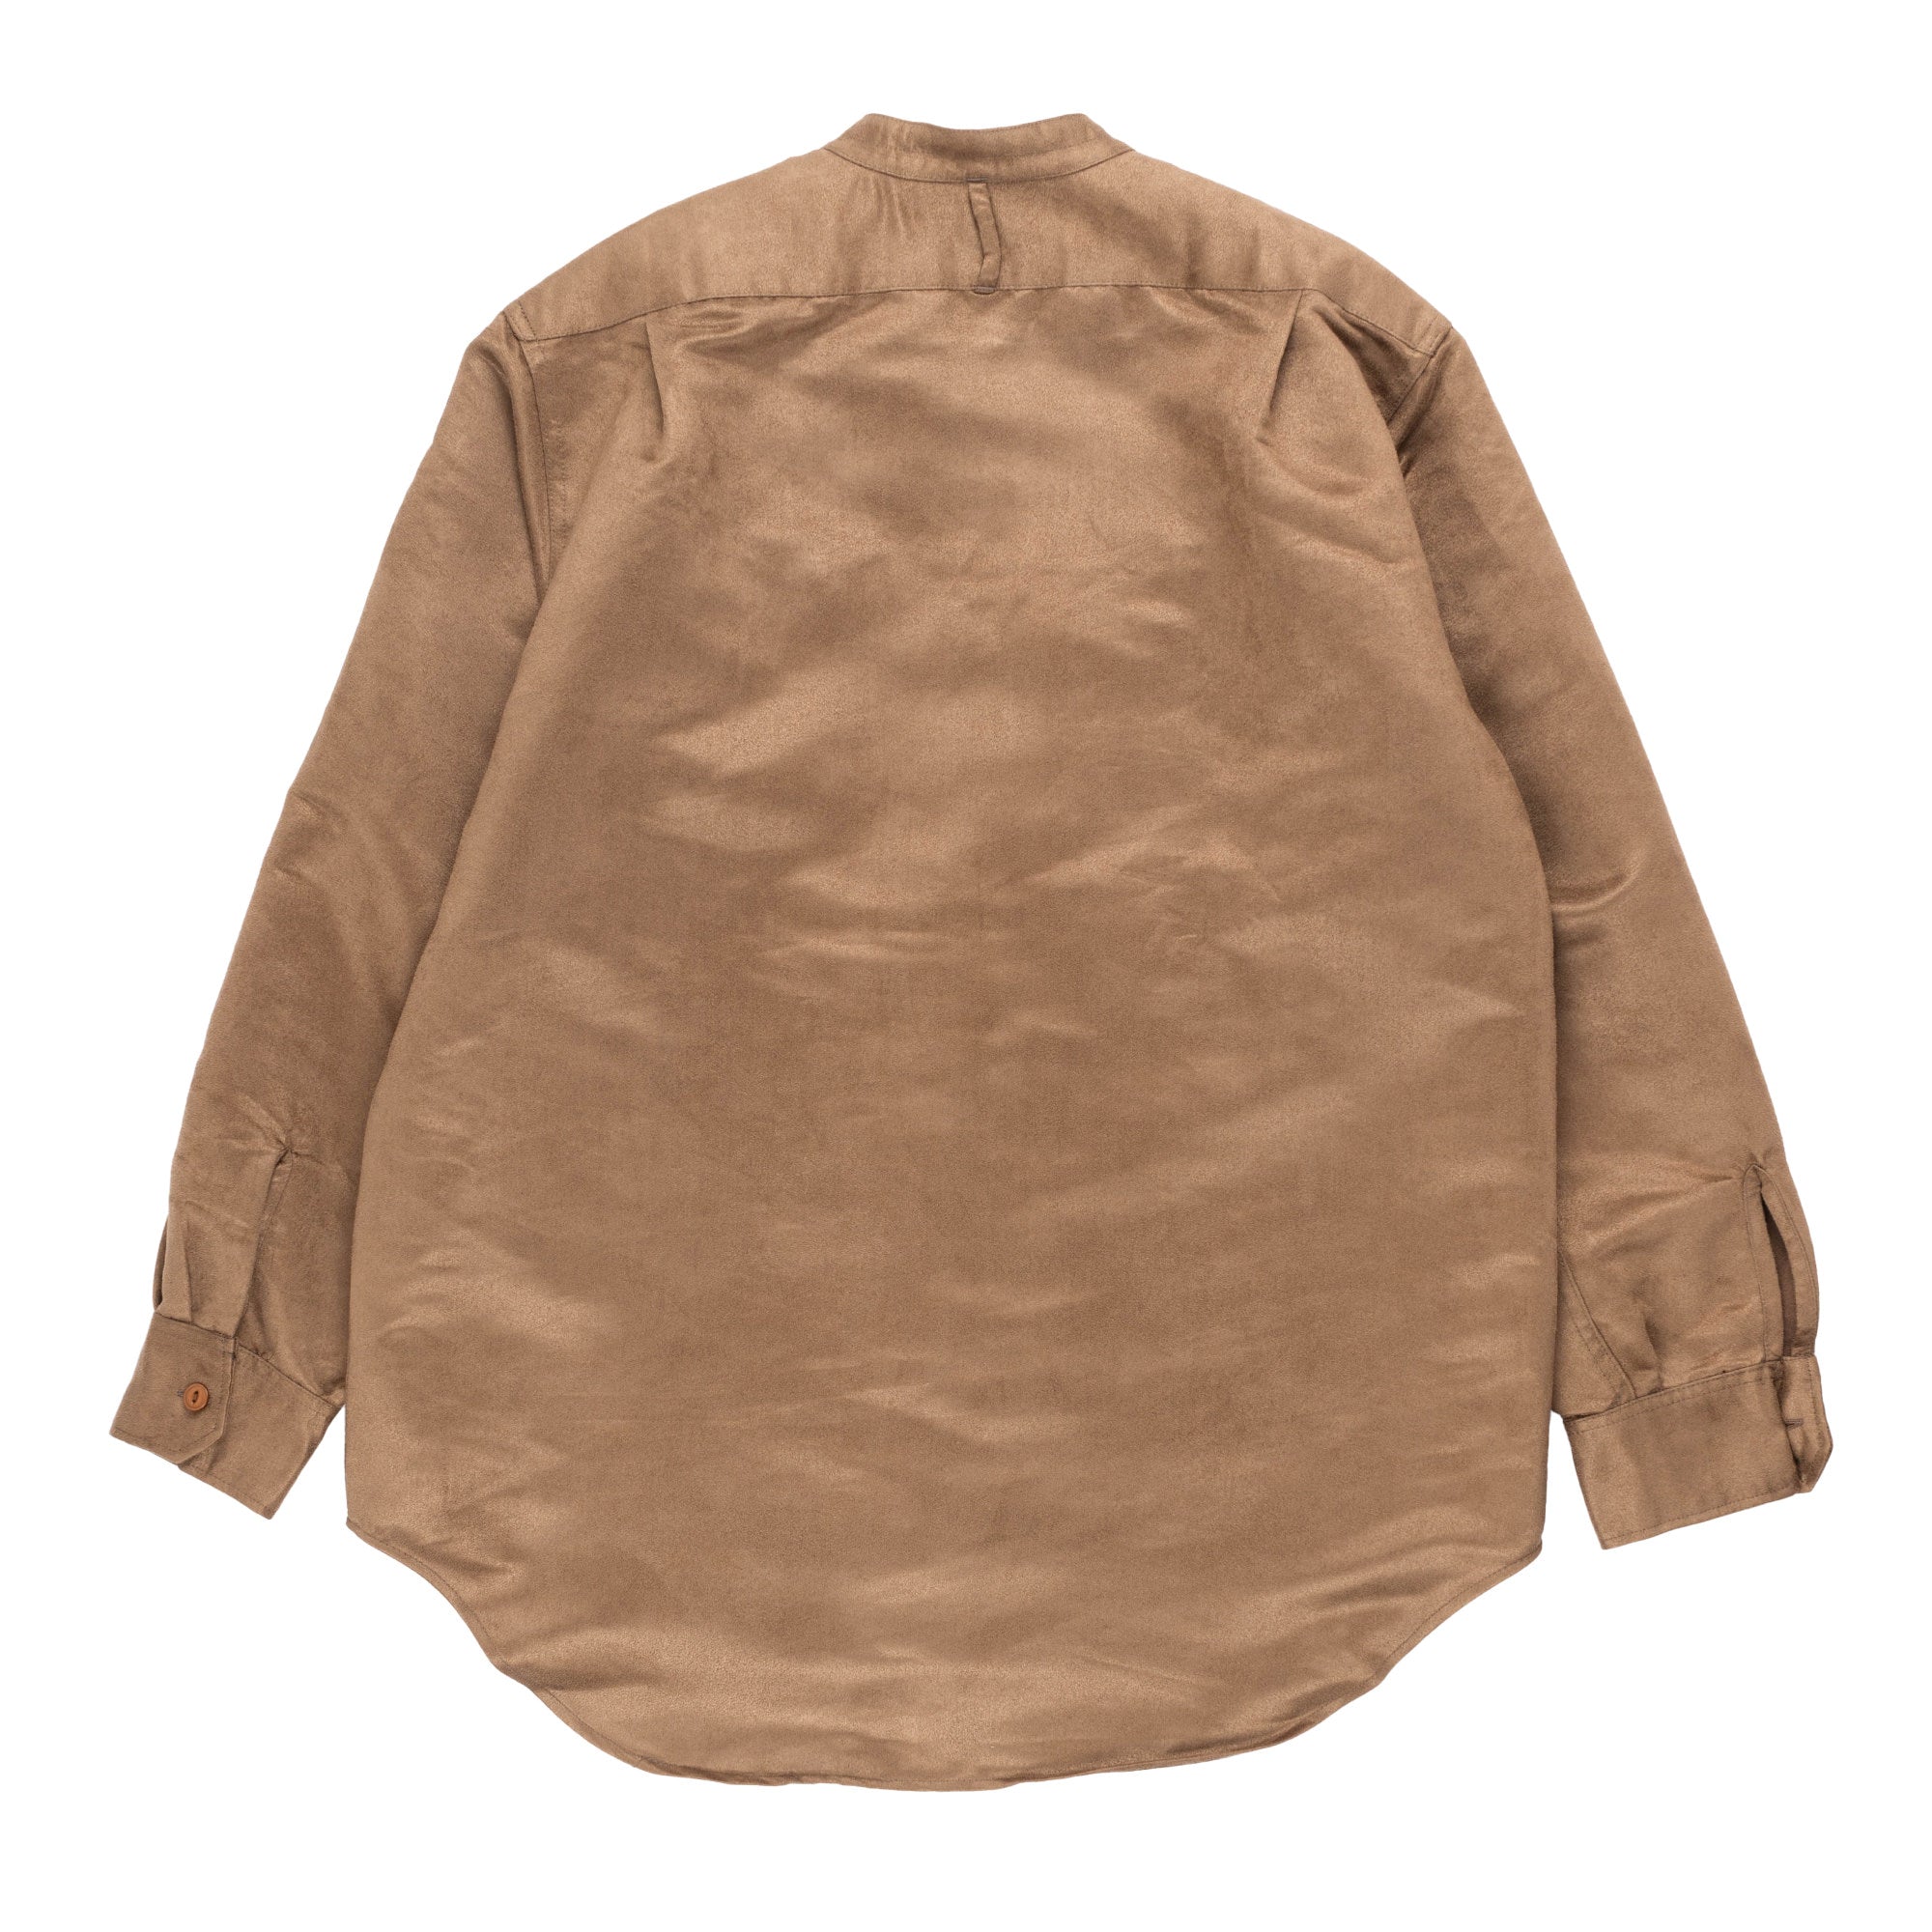 This plush corduroy jacket from